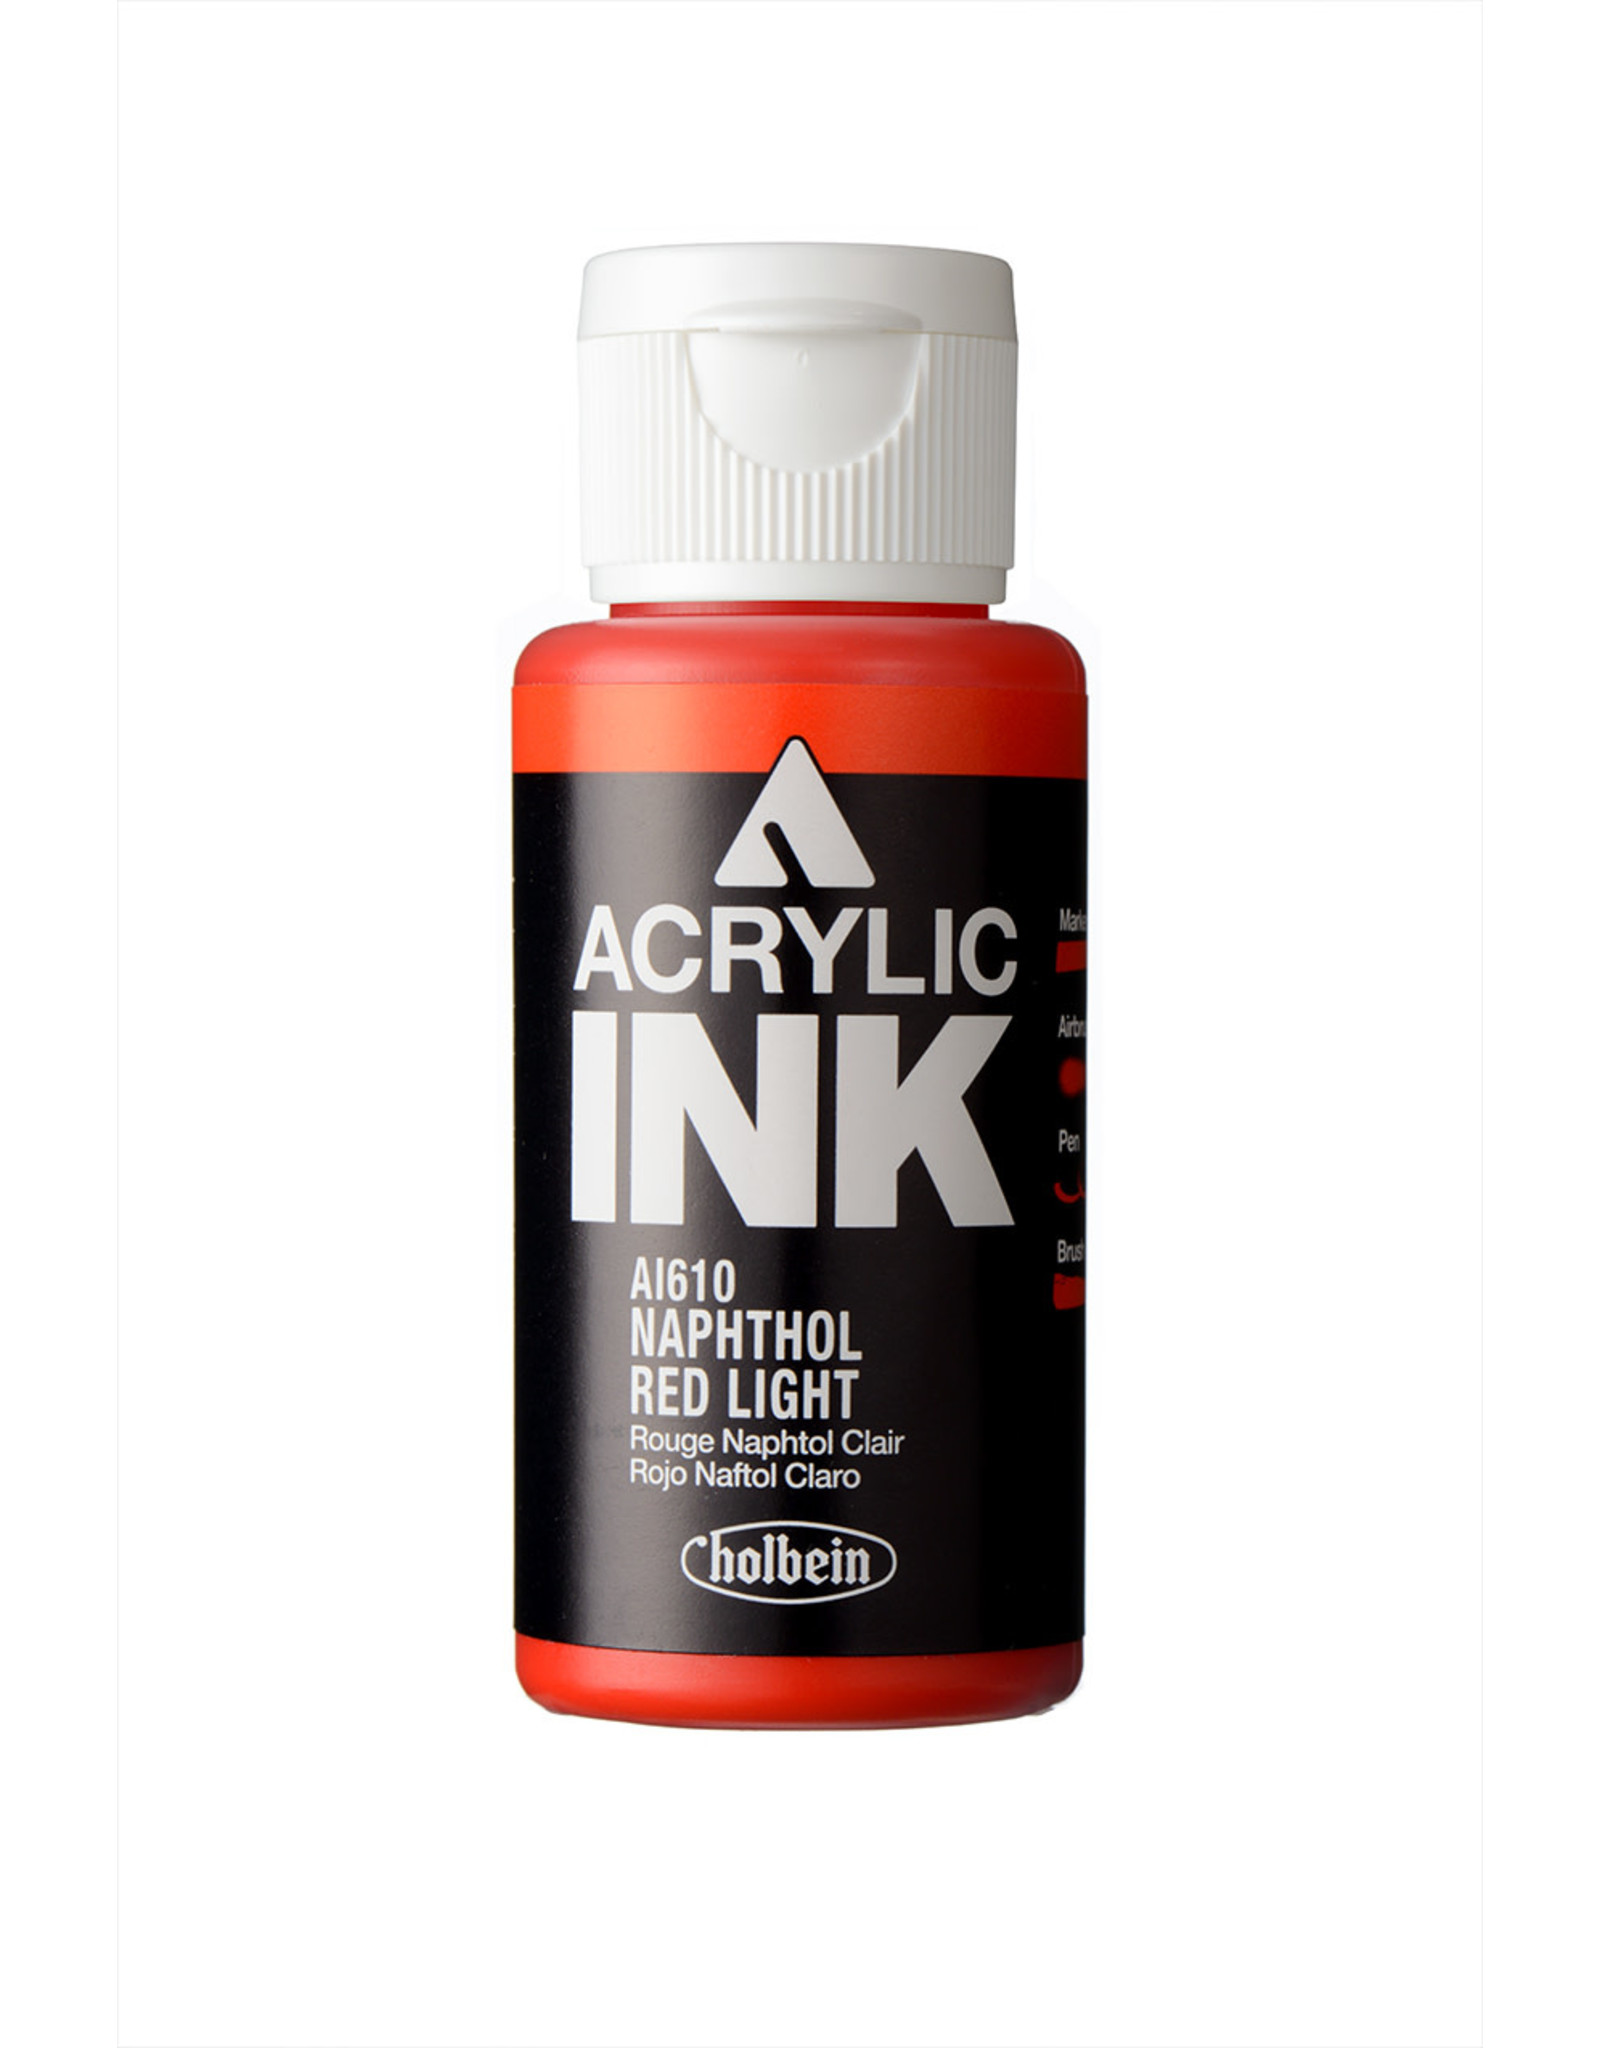 CLEARANCE Holbein Acrylic Ink, Napthol Red Light, 30ml